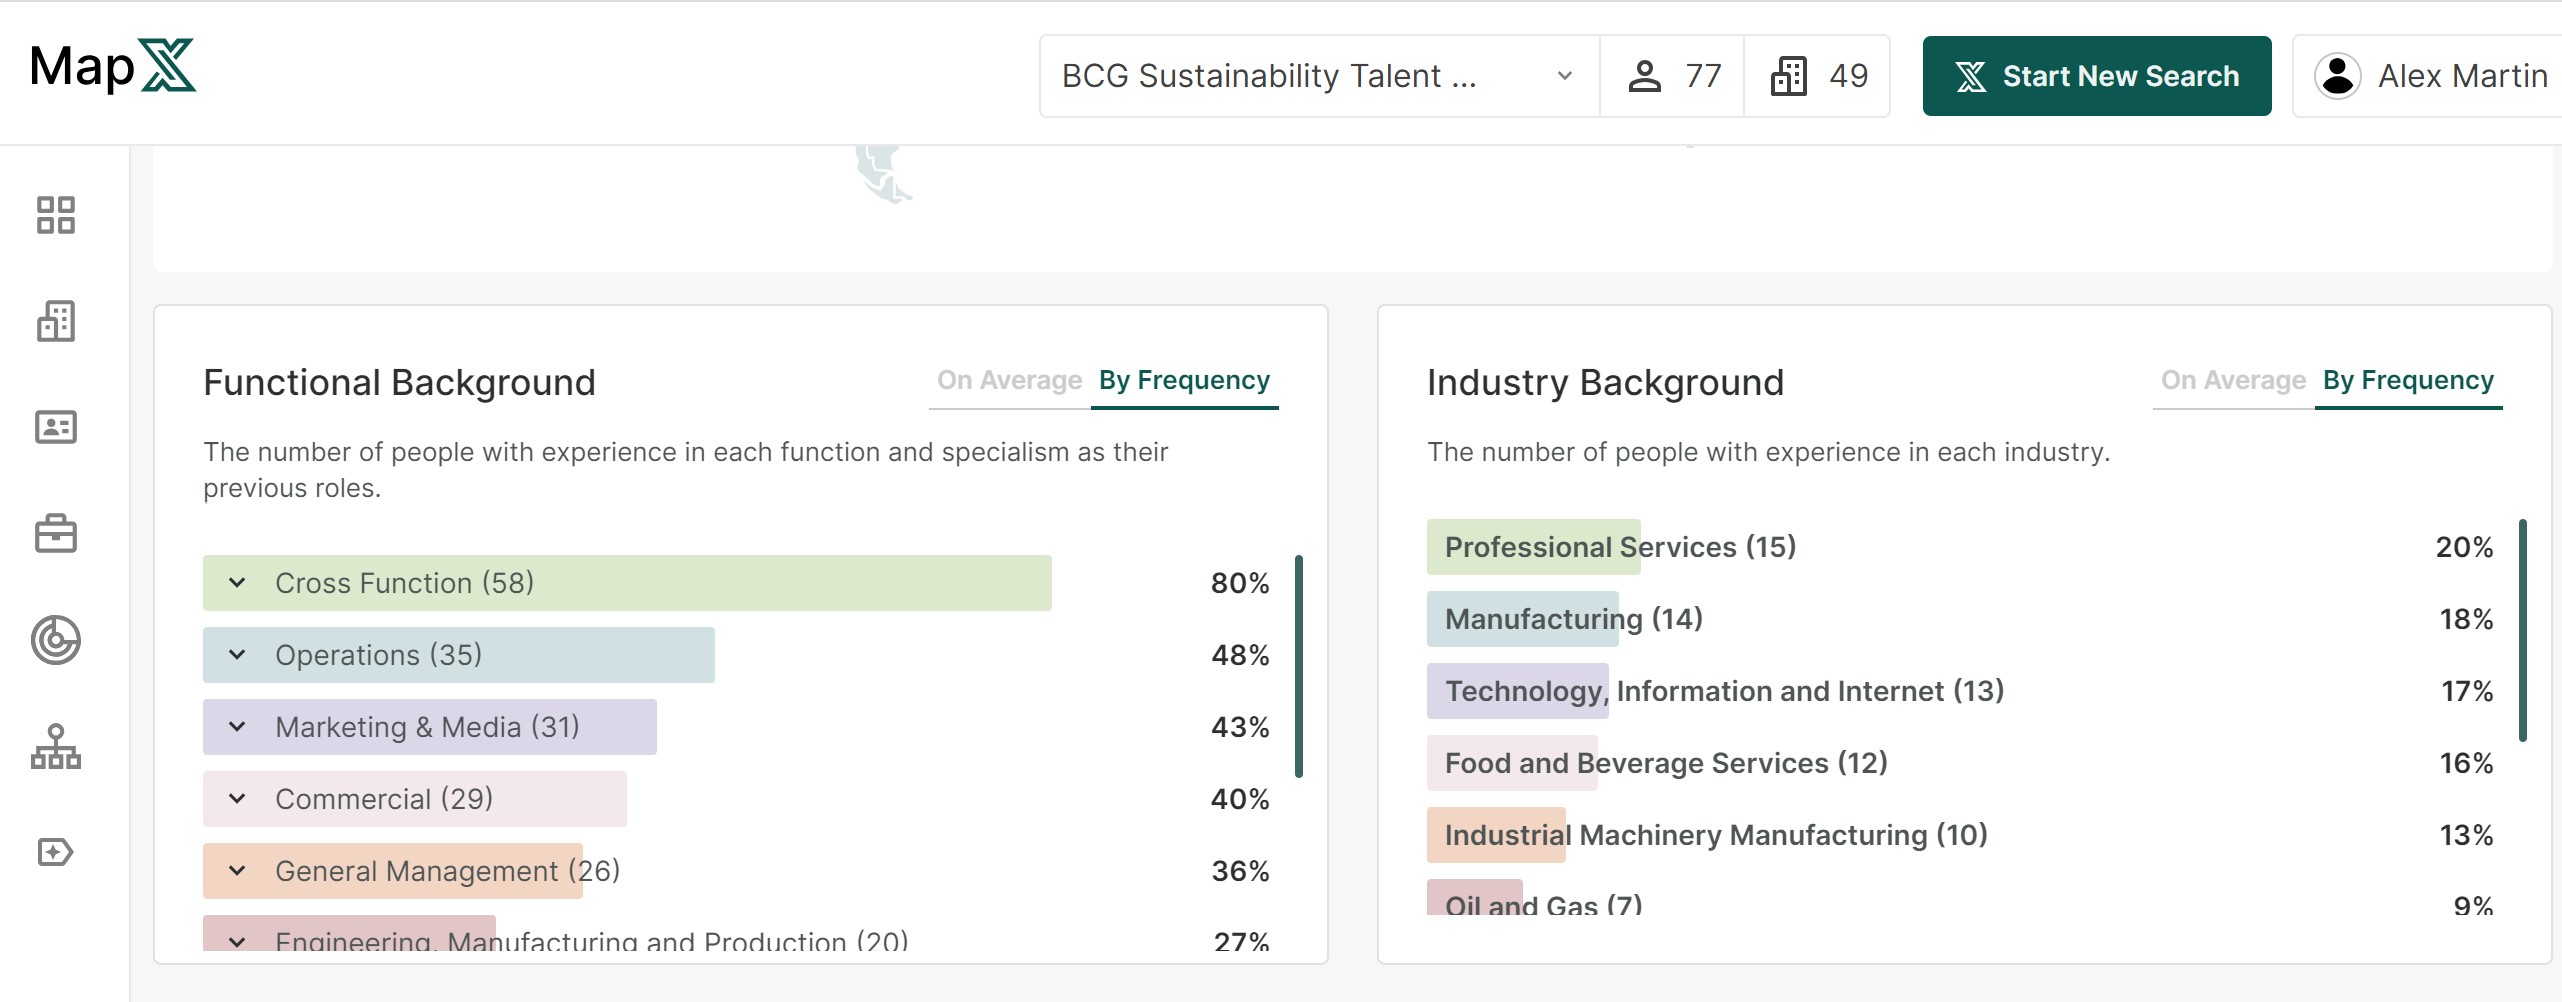 Functional and industry background sustainability